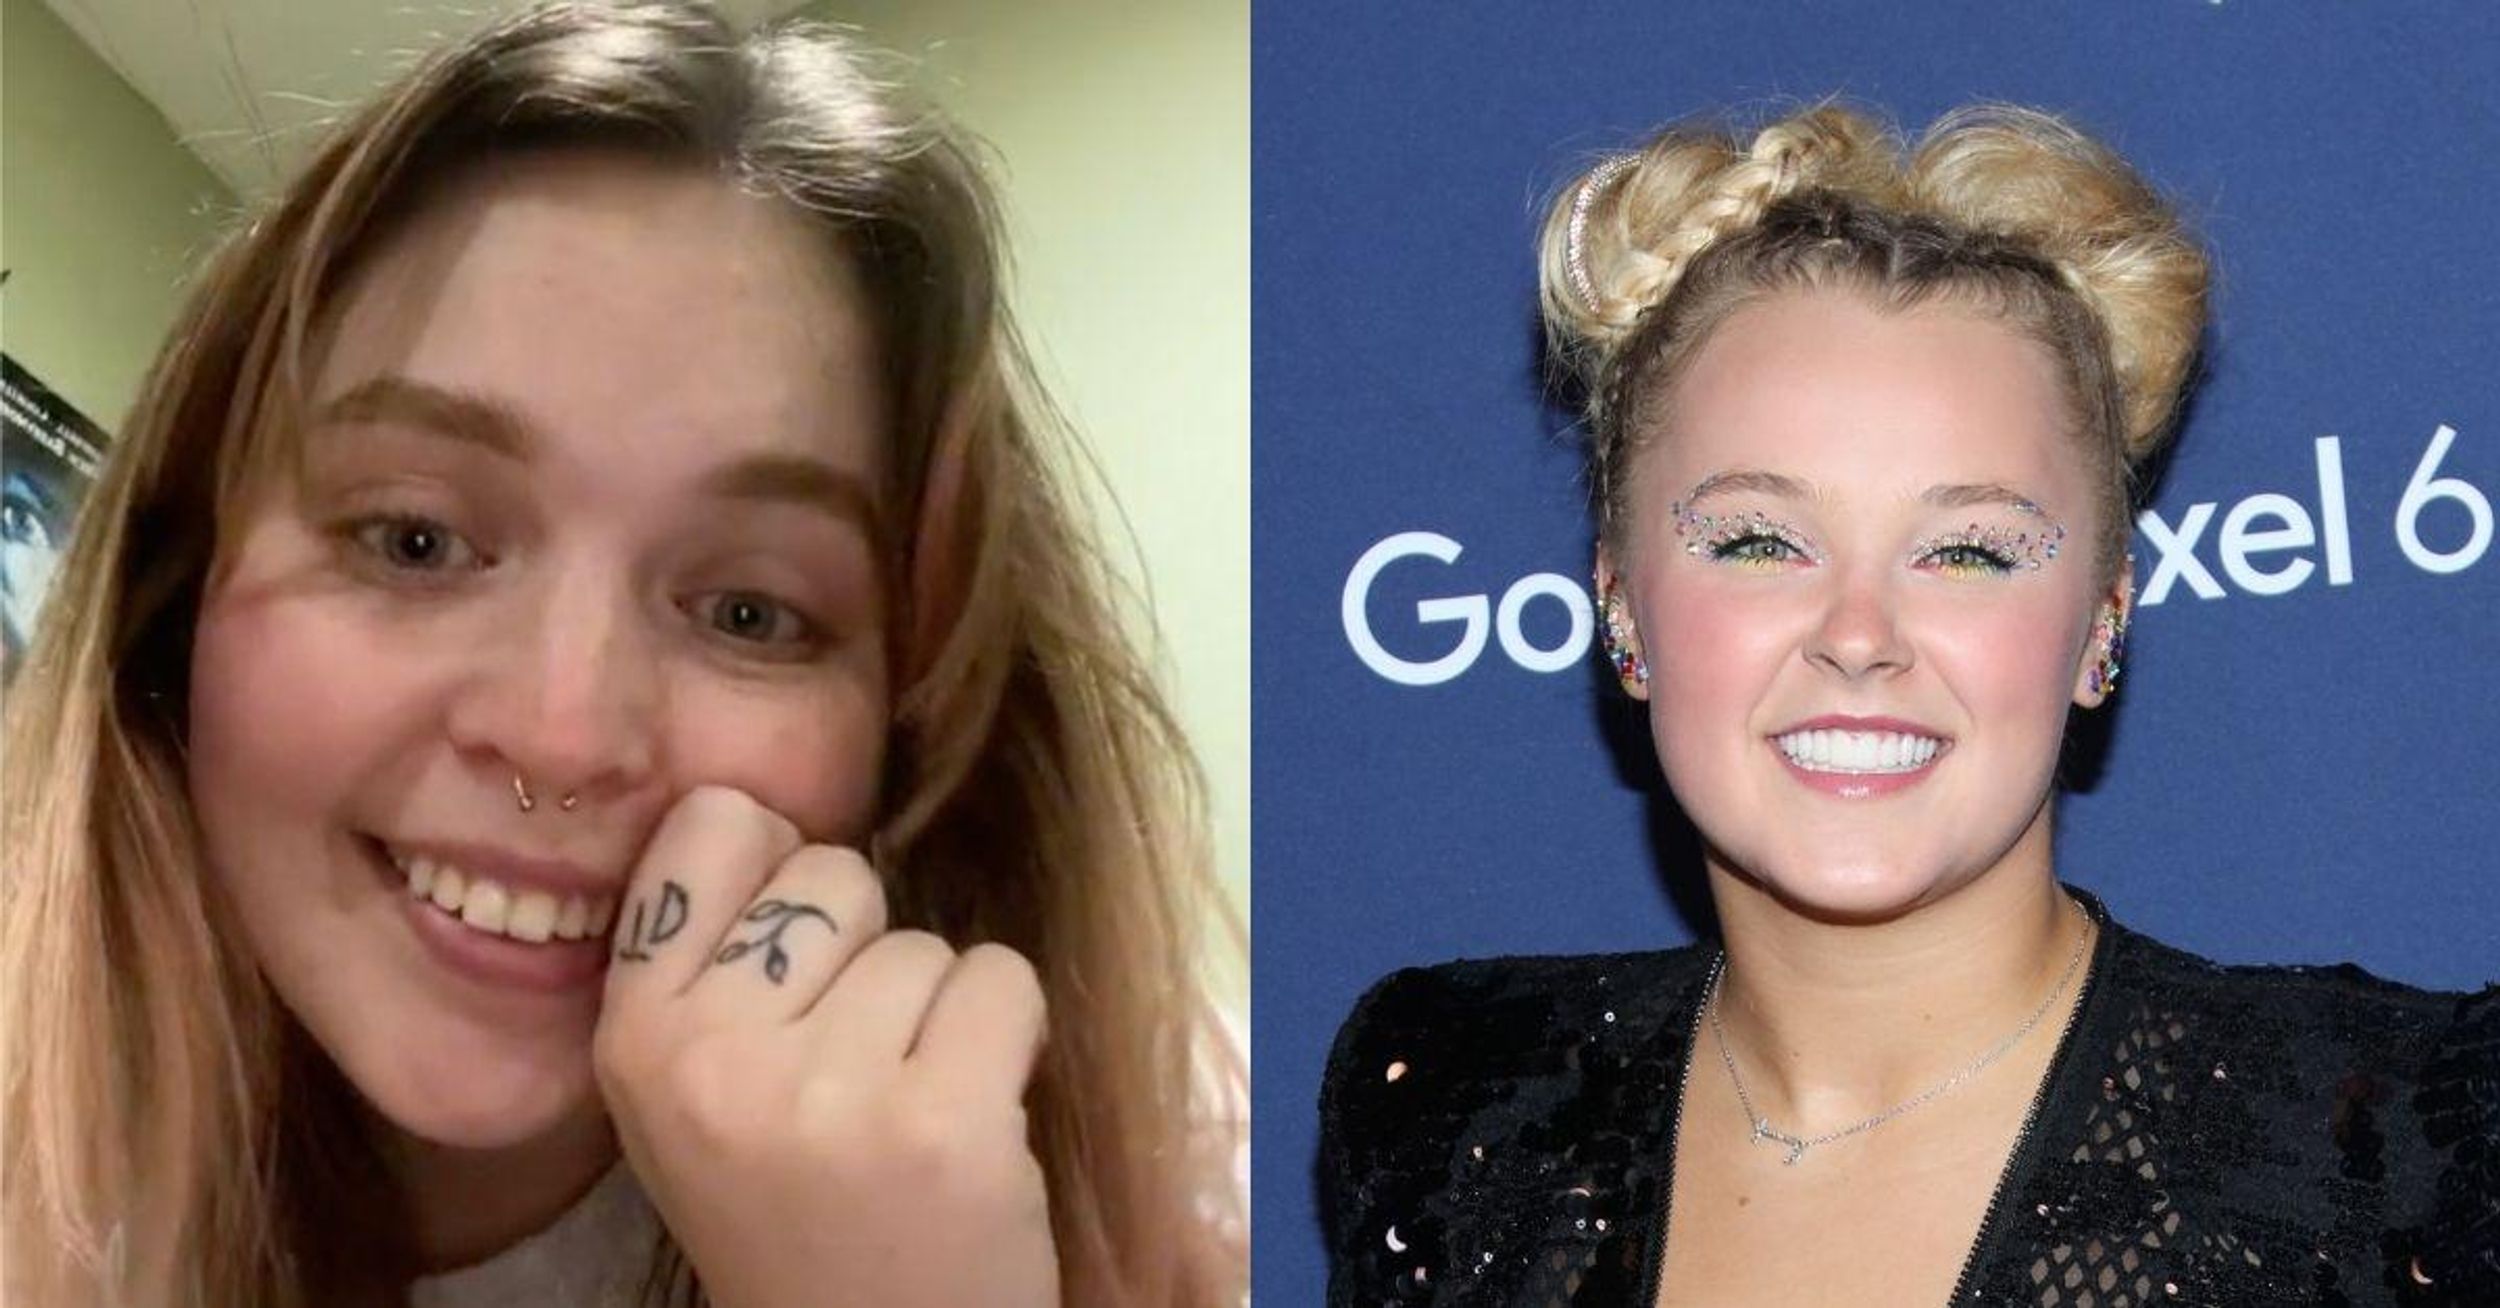 TikToker Floored After Twitter Threat To Nickelodeon Over JoJo Siwa Snub Sparks Call From The Cops